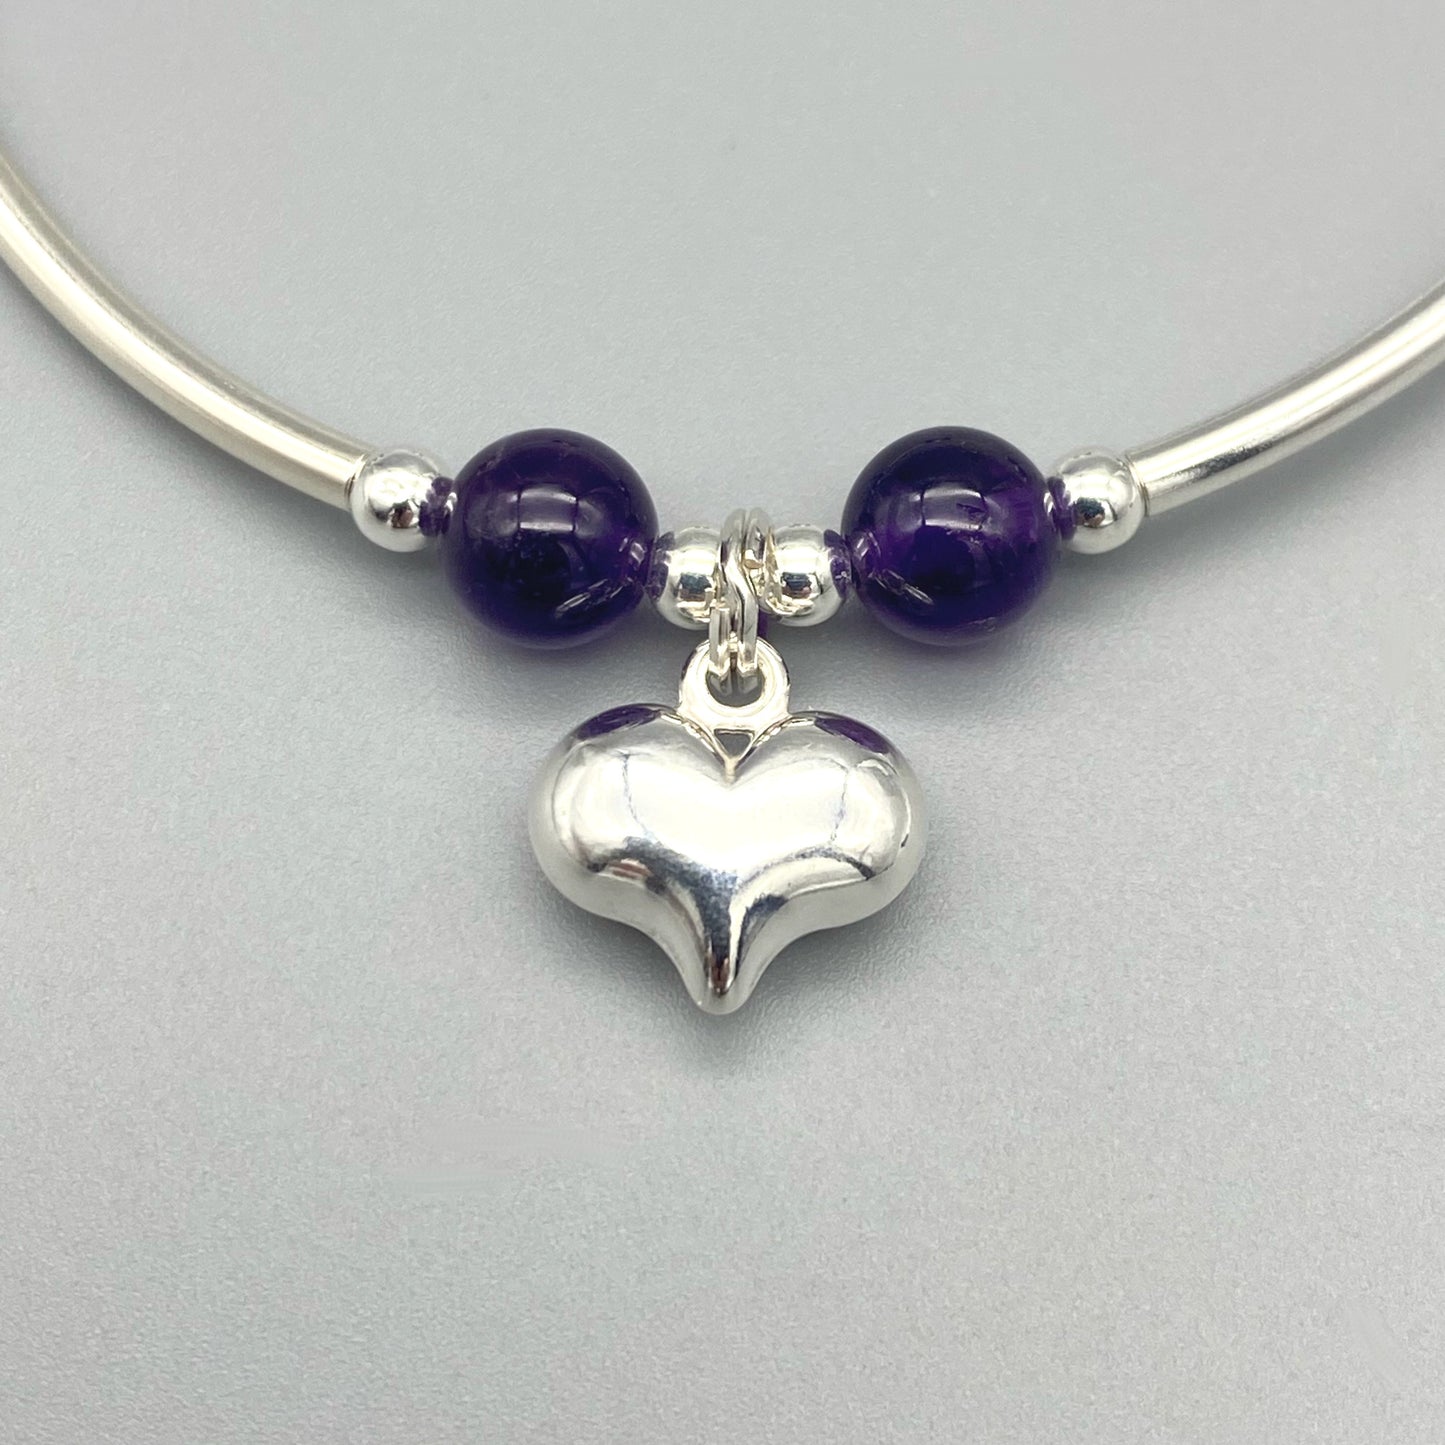 Closeup of Heart Charm Amethyst Sterling Silver Women's Stacking Bracelet by My Silver Wish